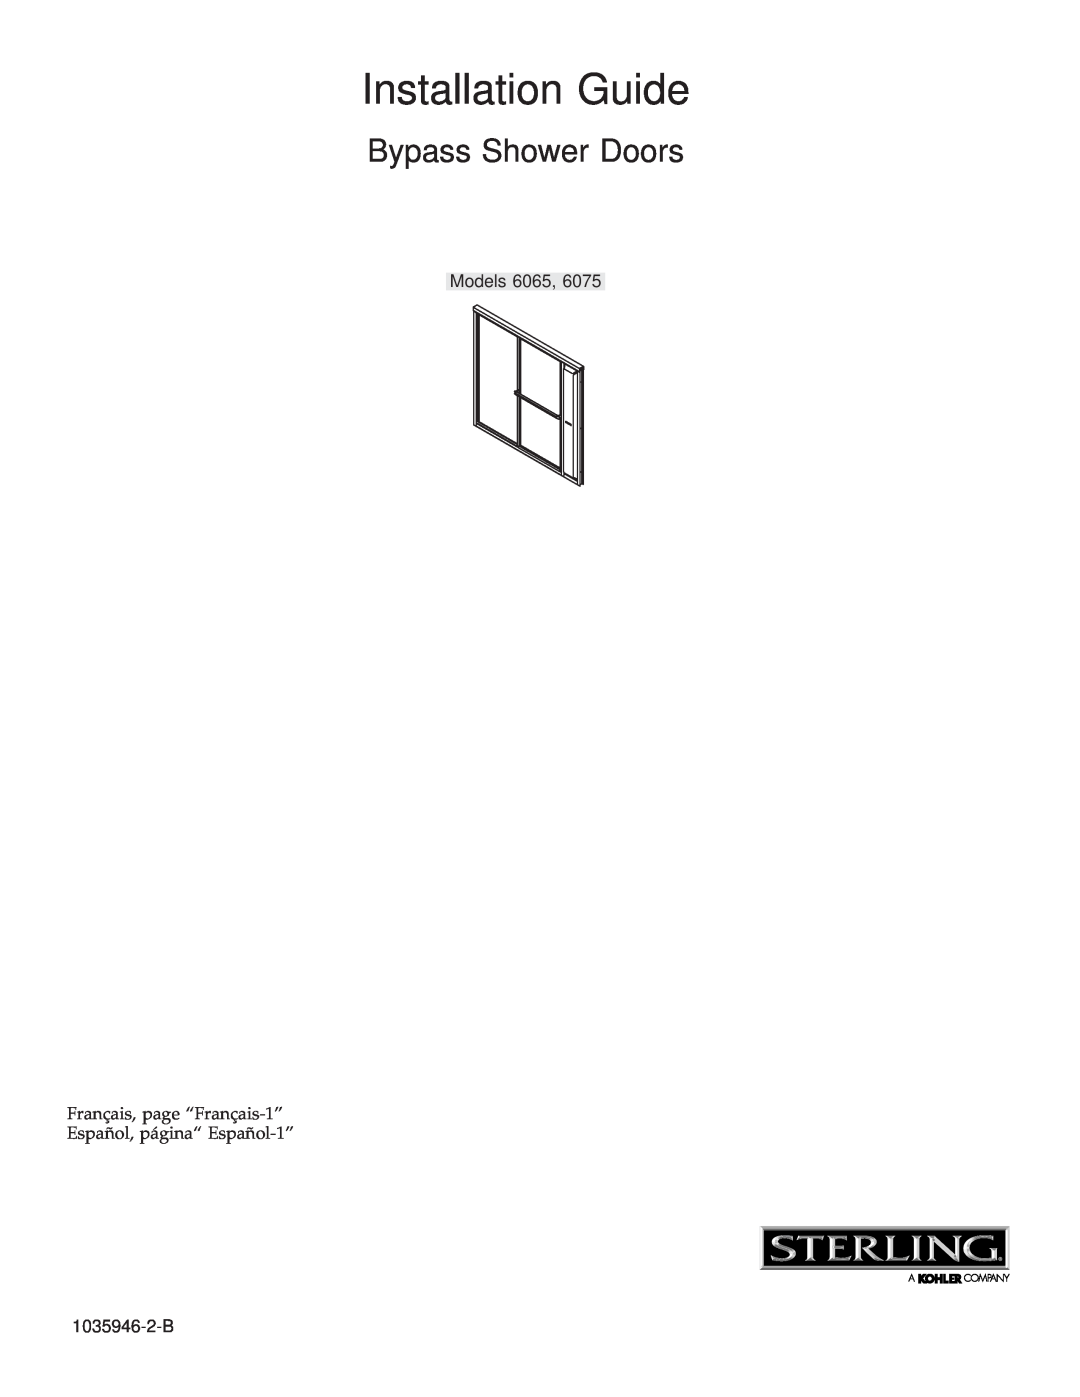 Sterling Plumbing 6065, 6075 manual Installation Guide, Bypass Shower Doors 